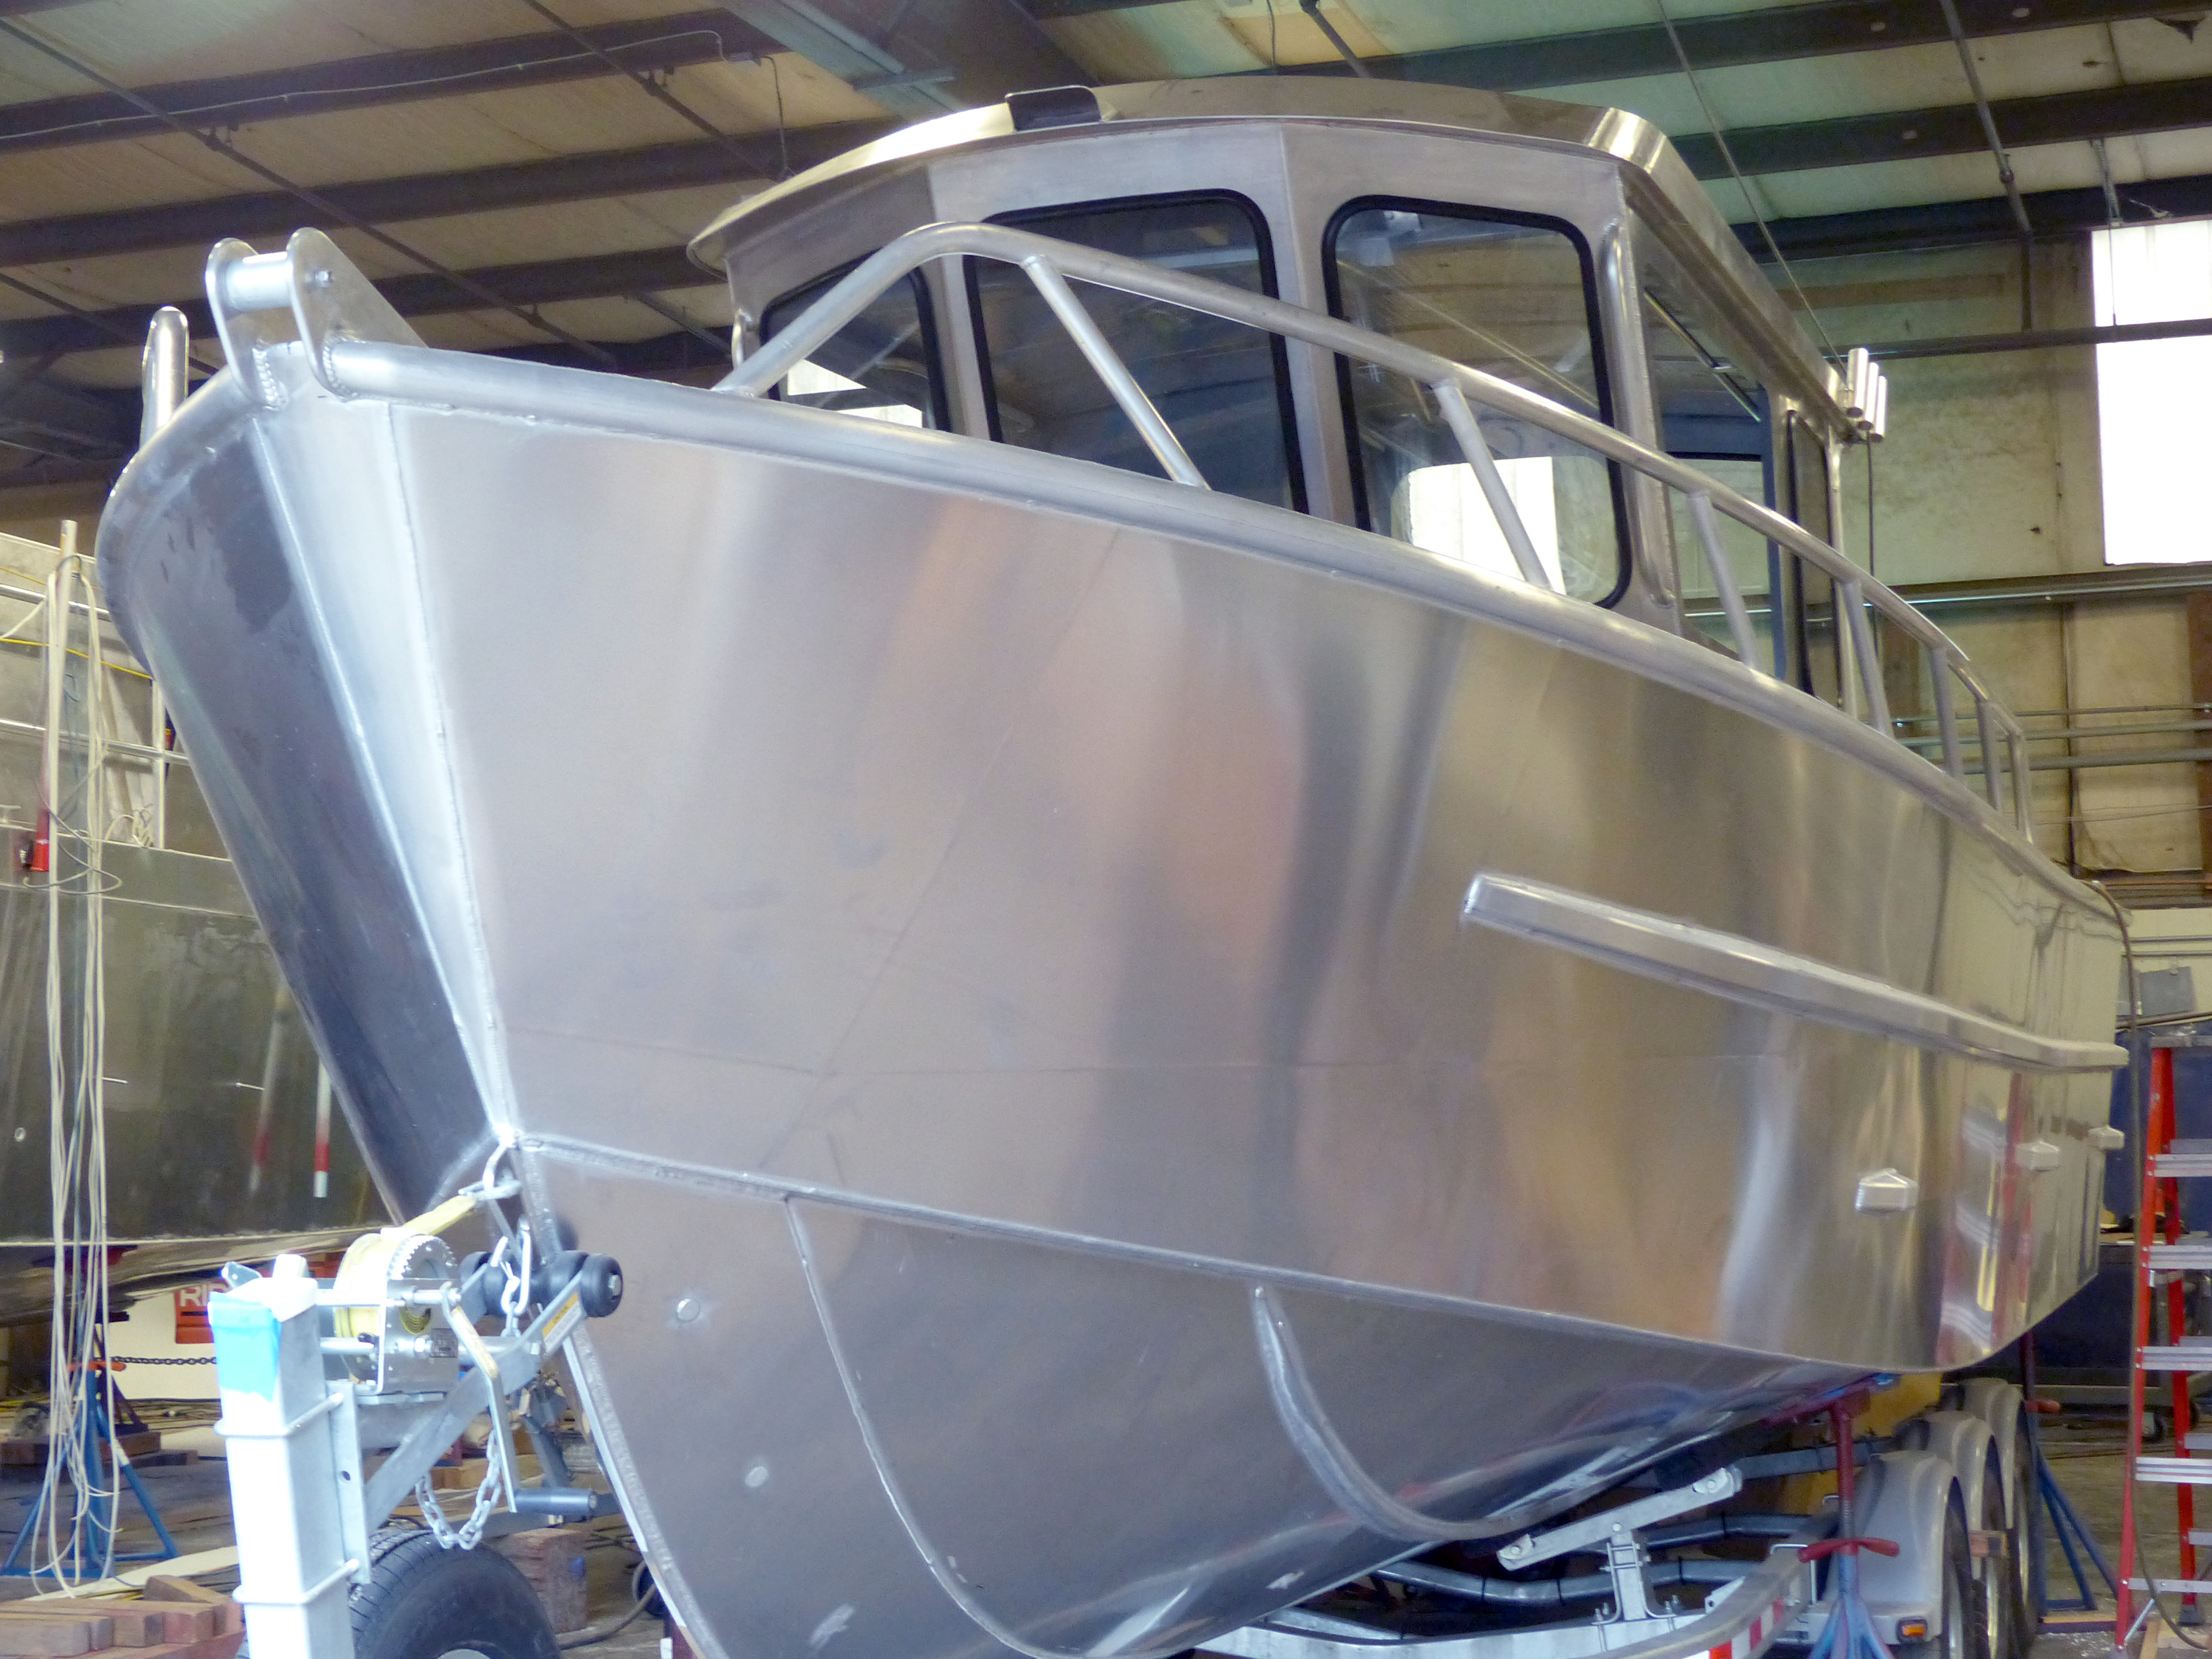 The 28-foot aluminum boat under construction at Lee Shore Boats in Port Angeles that will run fishing trips out of Crescent City